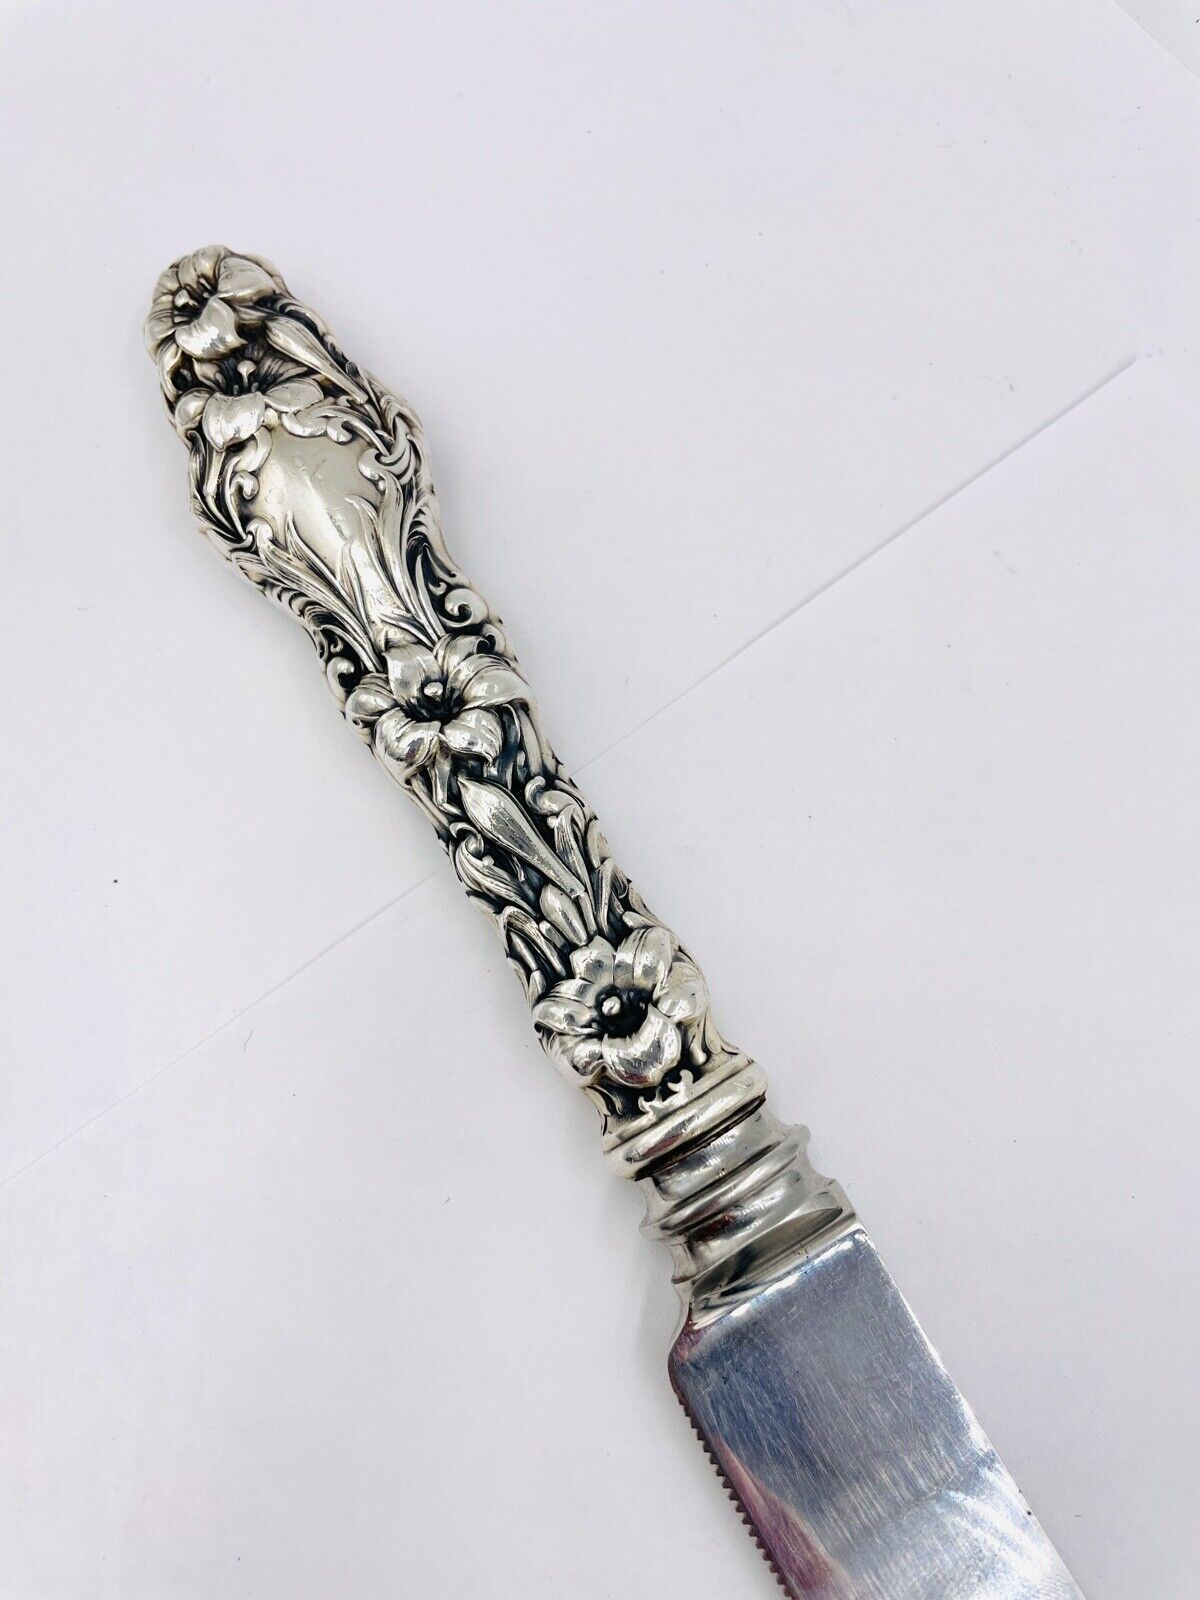 Gorham Old Lily Bread Cake Knife 12 3/4" Sterling Silver handle No Mono